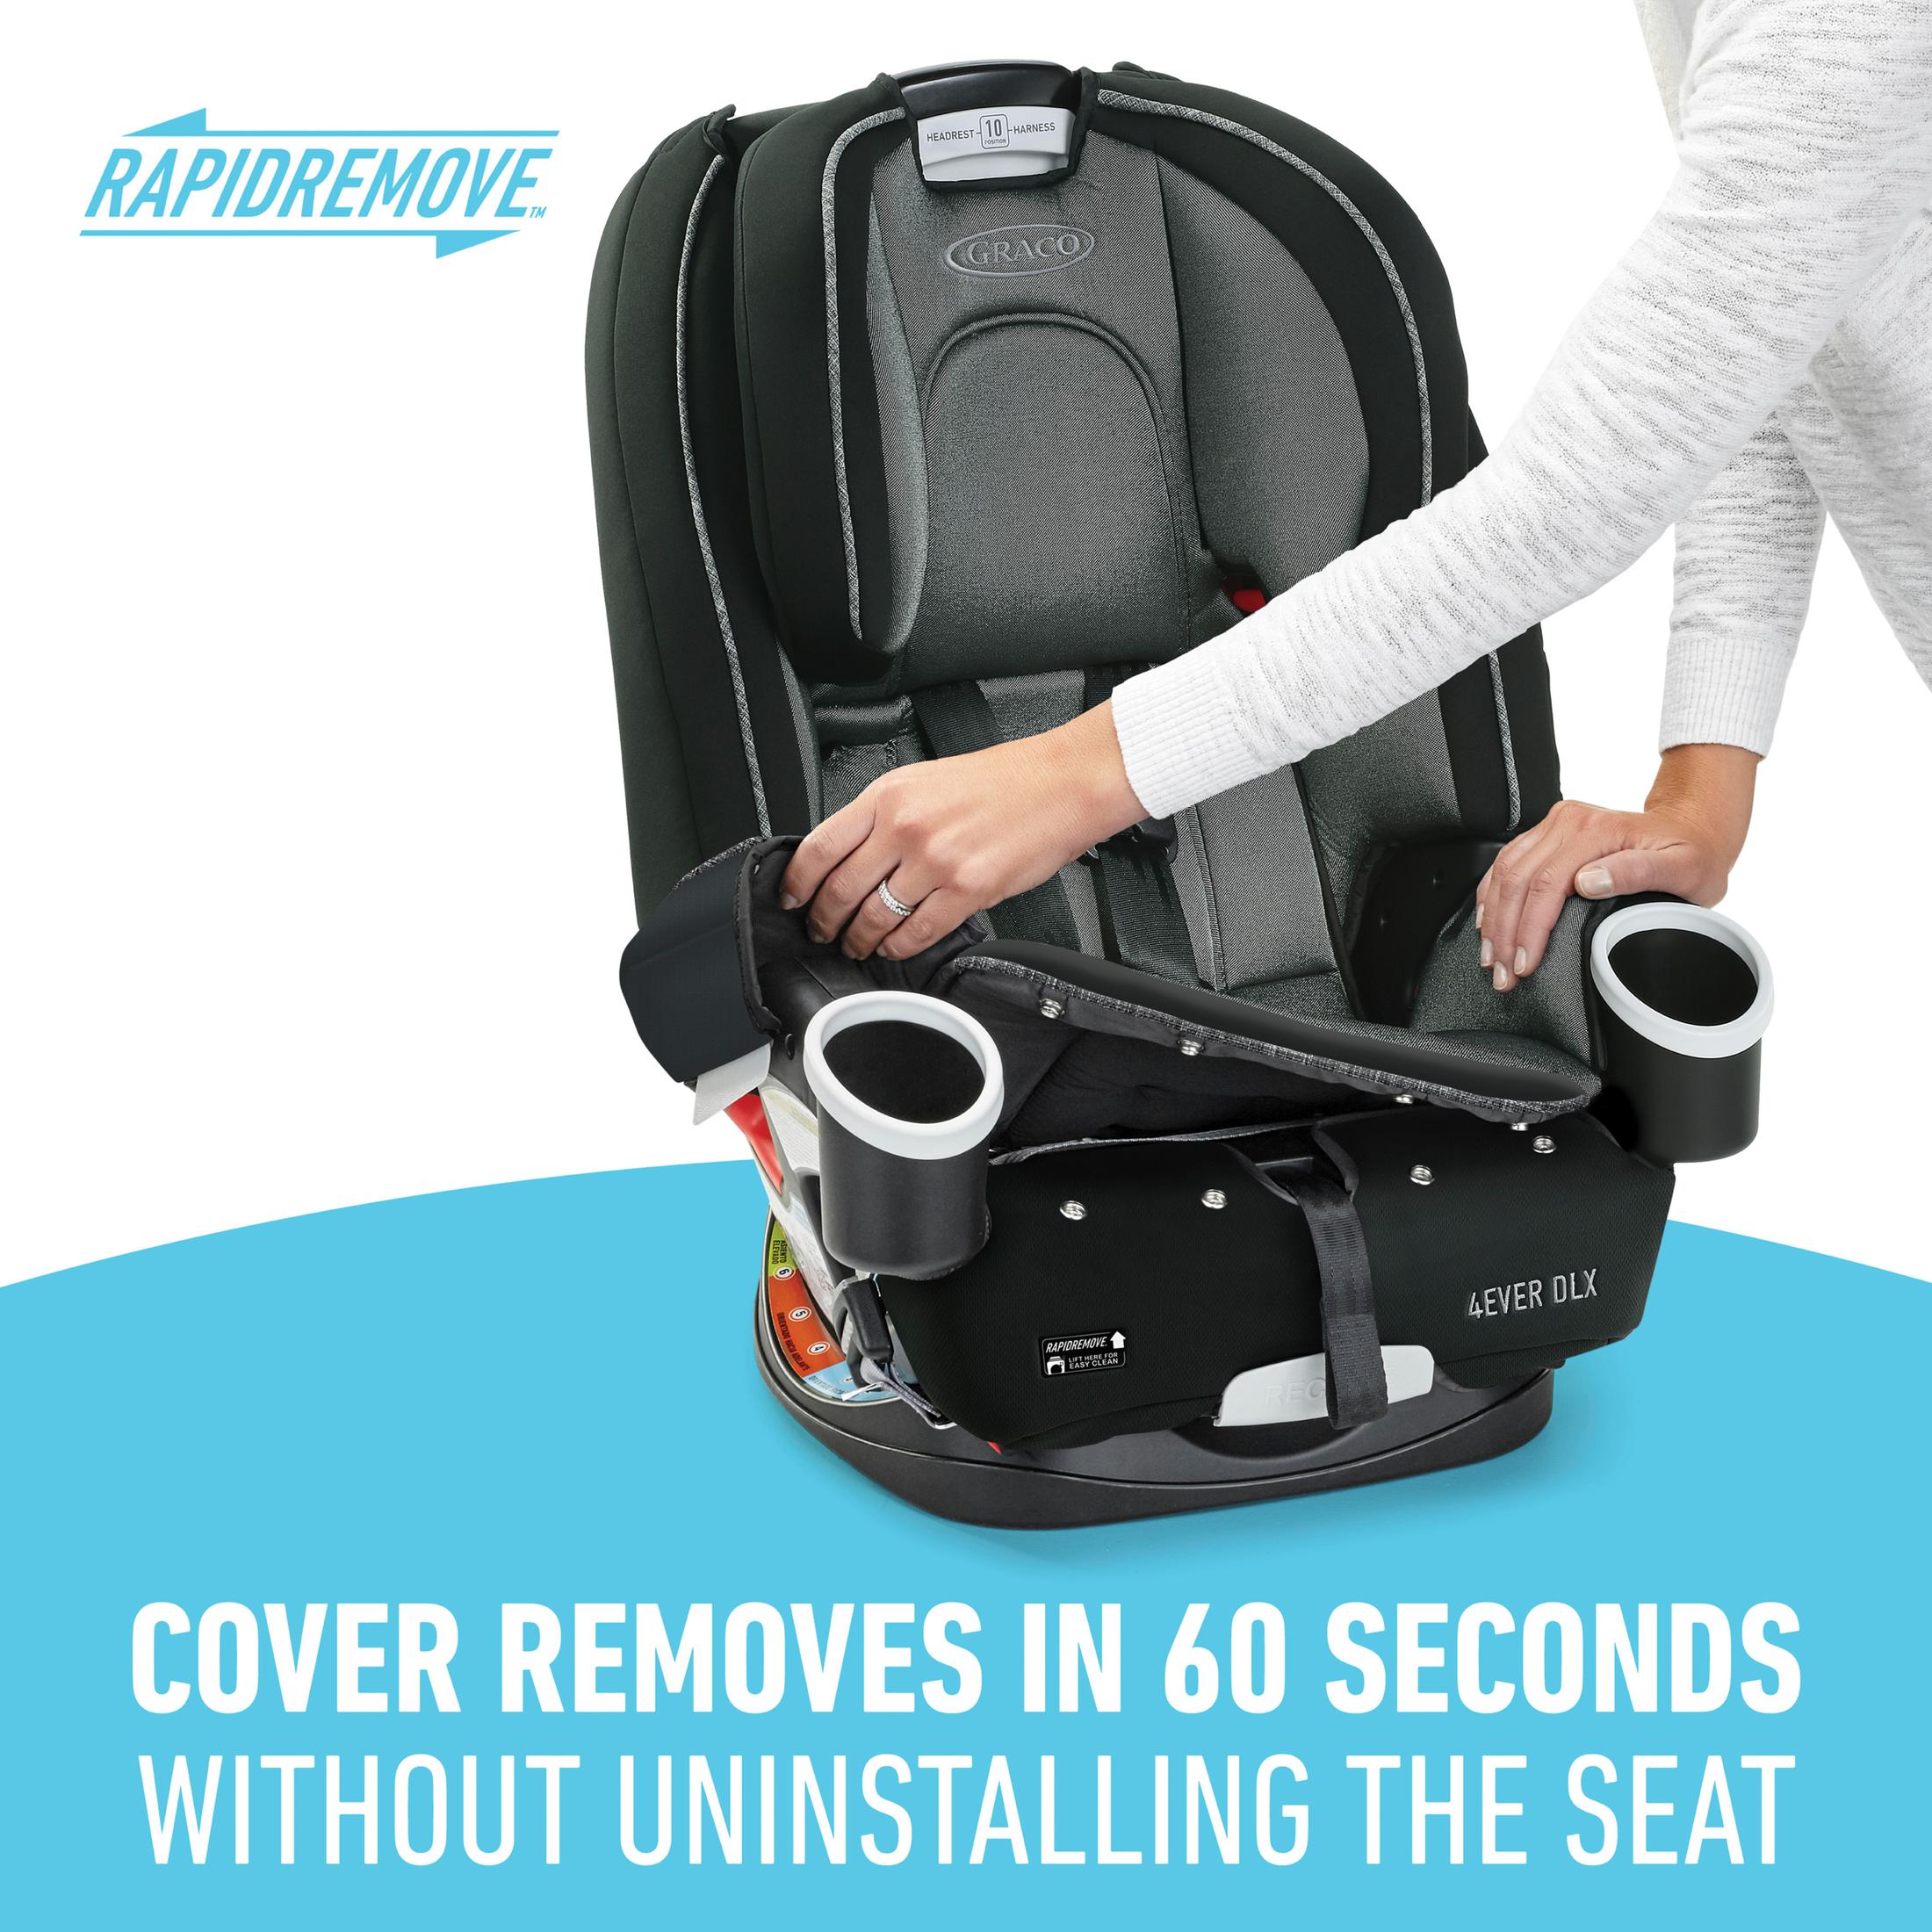 Graco 4Ever DLX 4-in-1 Convertible Car Seat, Fairmont - image 7 of 11